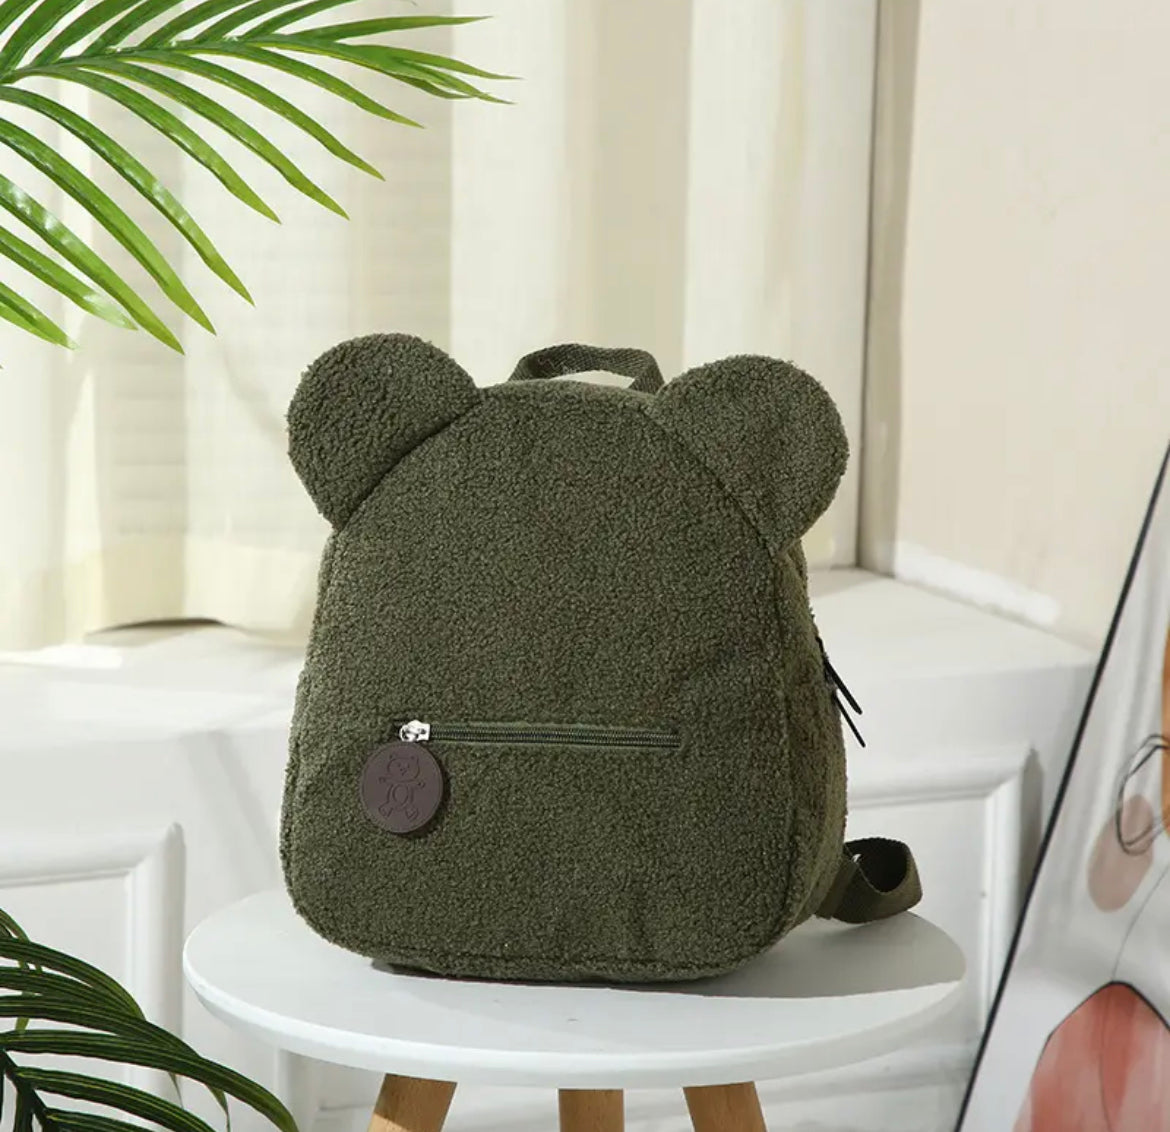 Personalized Embroidered Teddy Bear Backpack